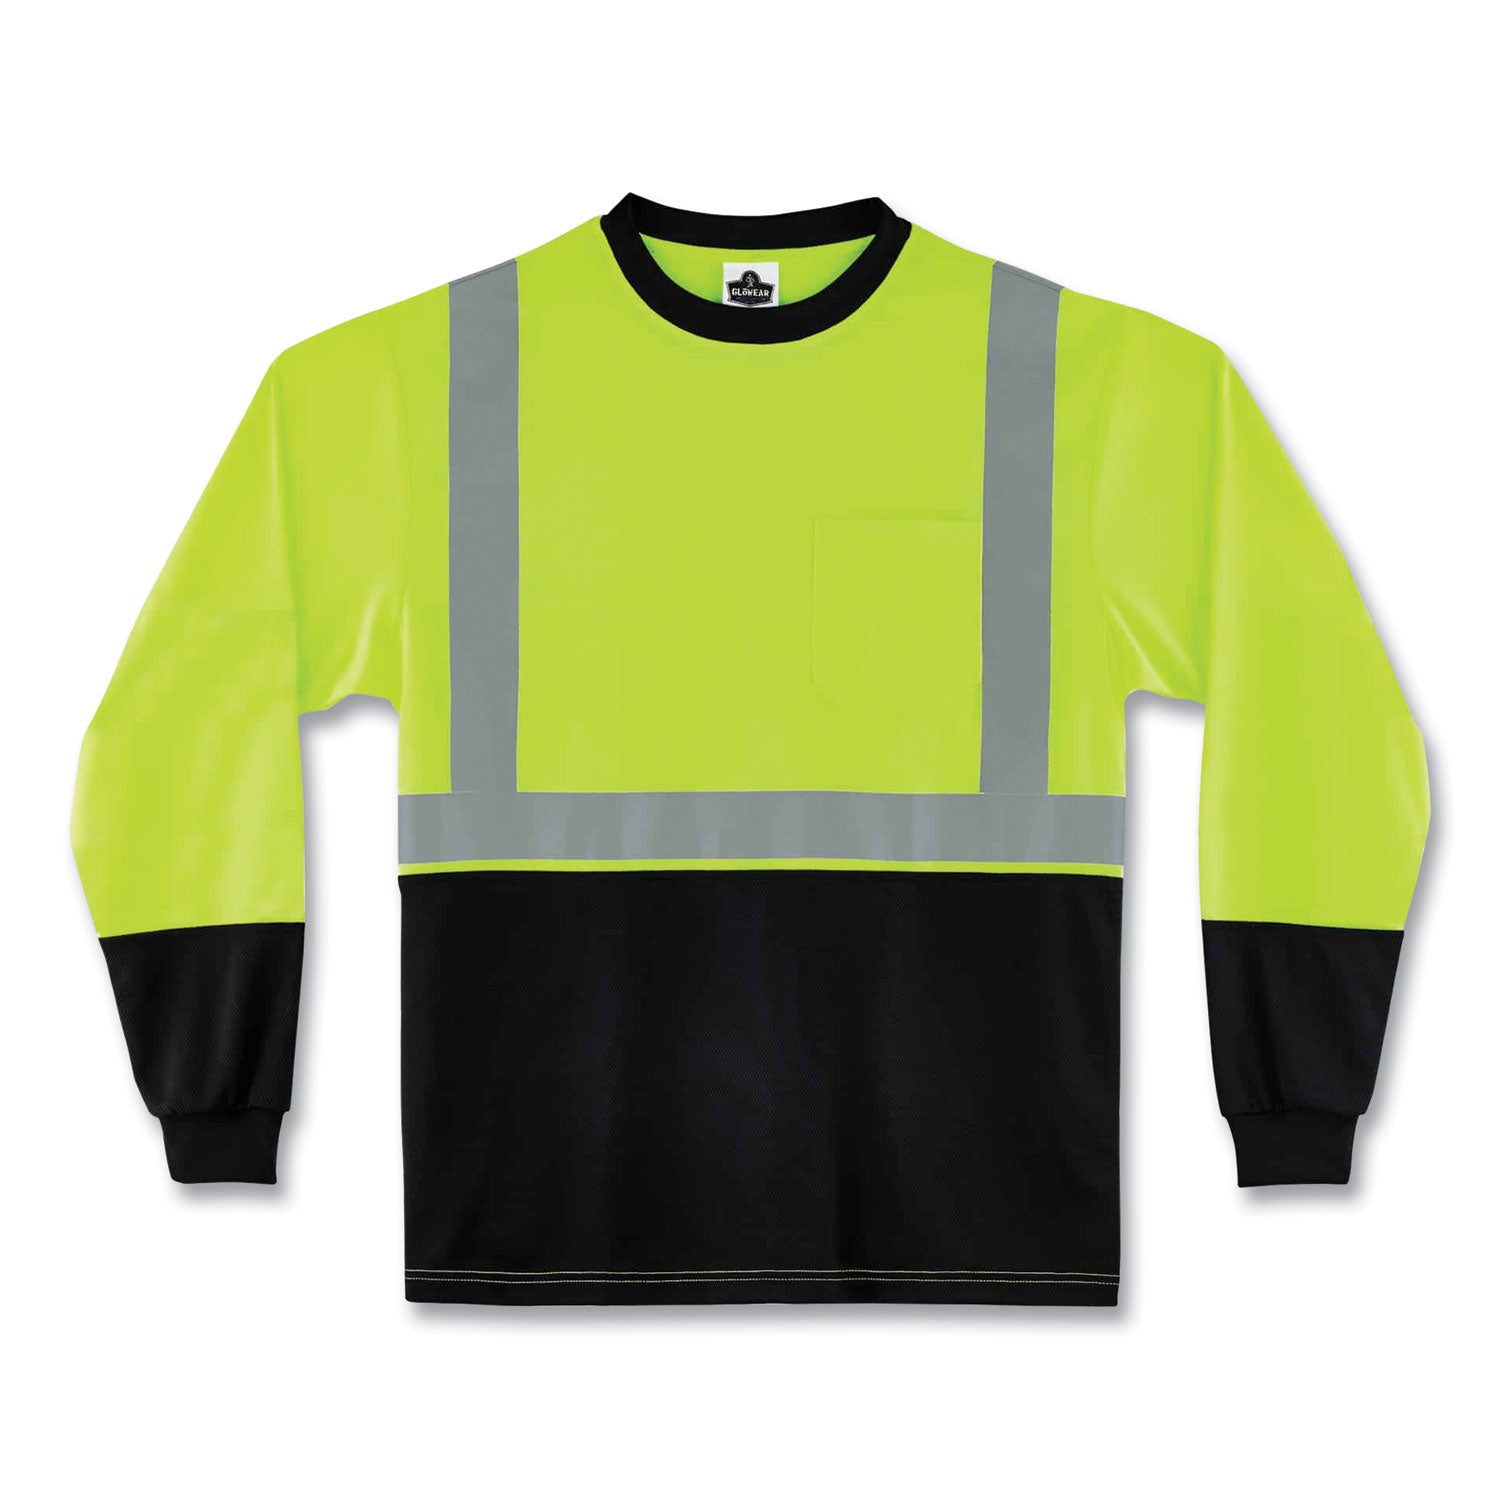 glowear-8291bk-type-r-class-2-black-front-long-sleeve-t-shirt-polyester-x-large-lime-ships-in-1-3-business-days_ego22705 - 1